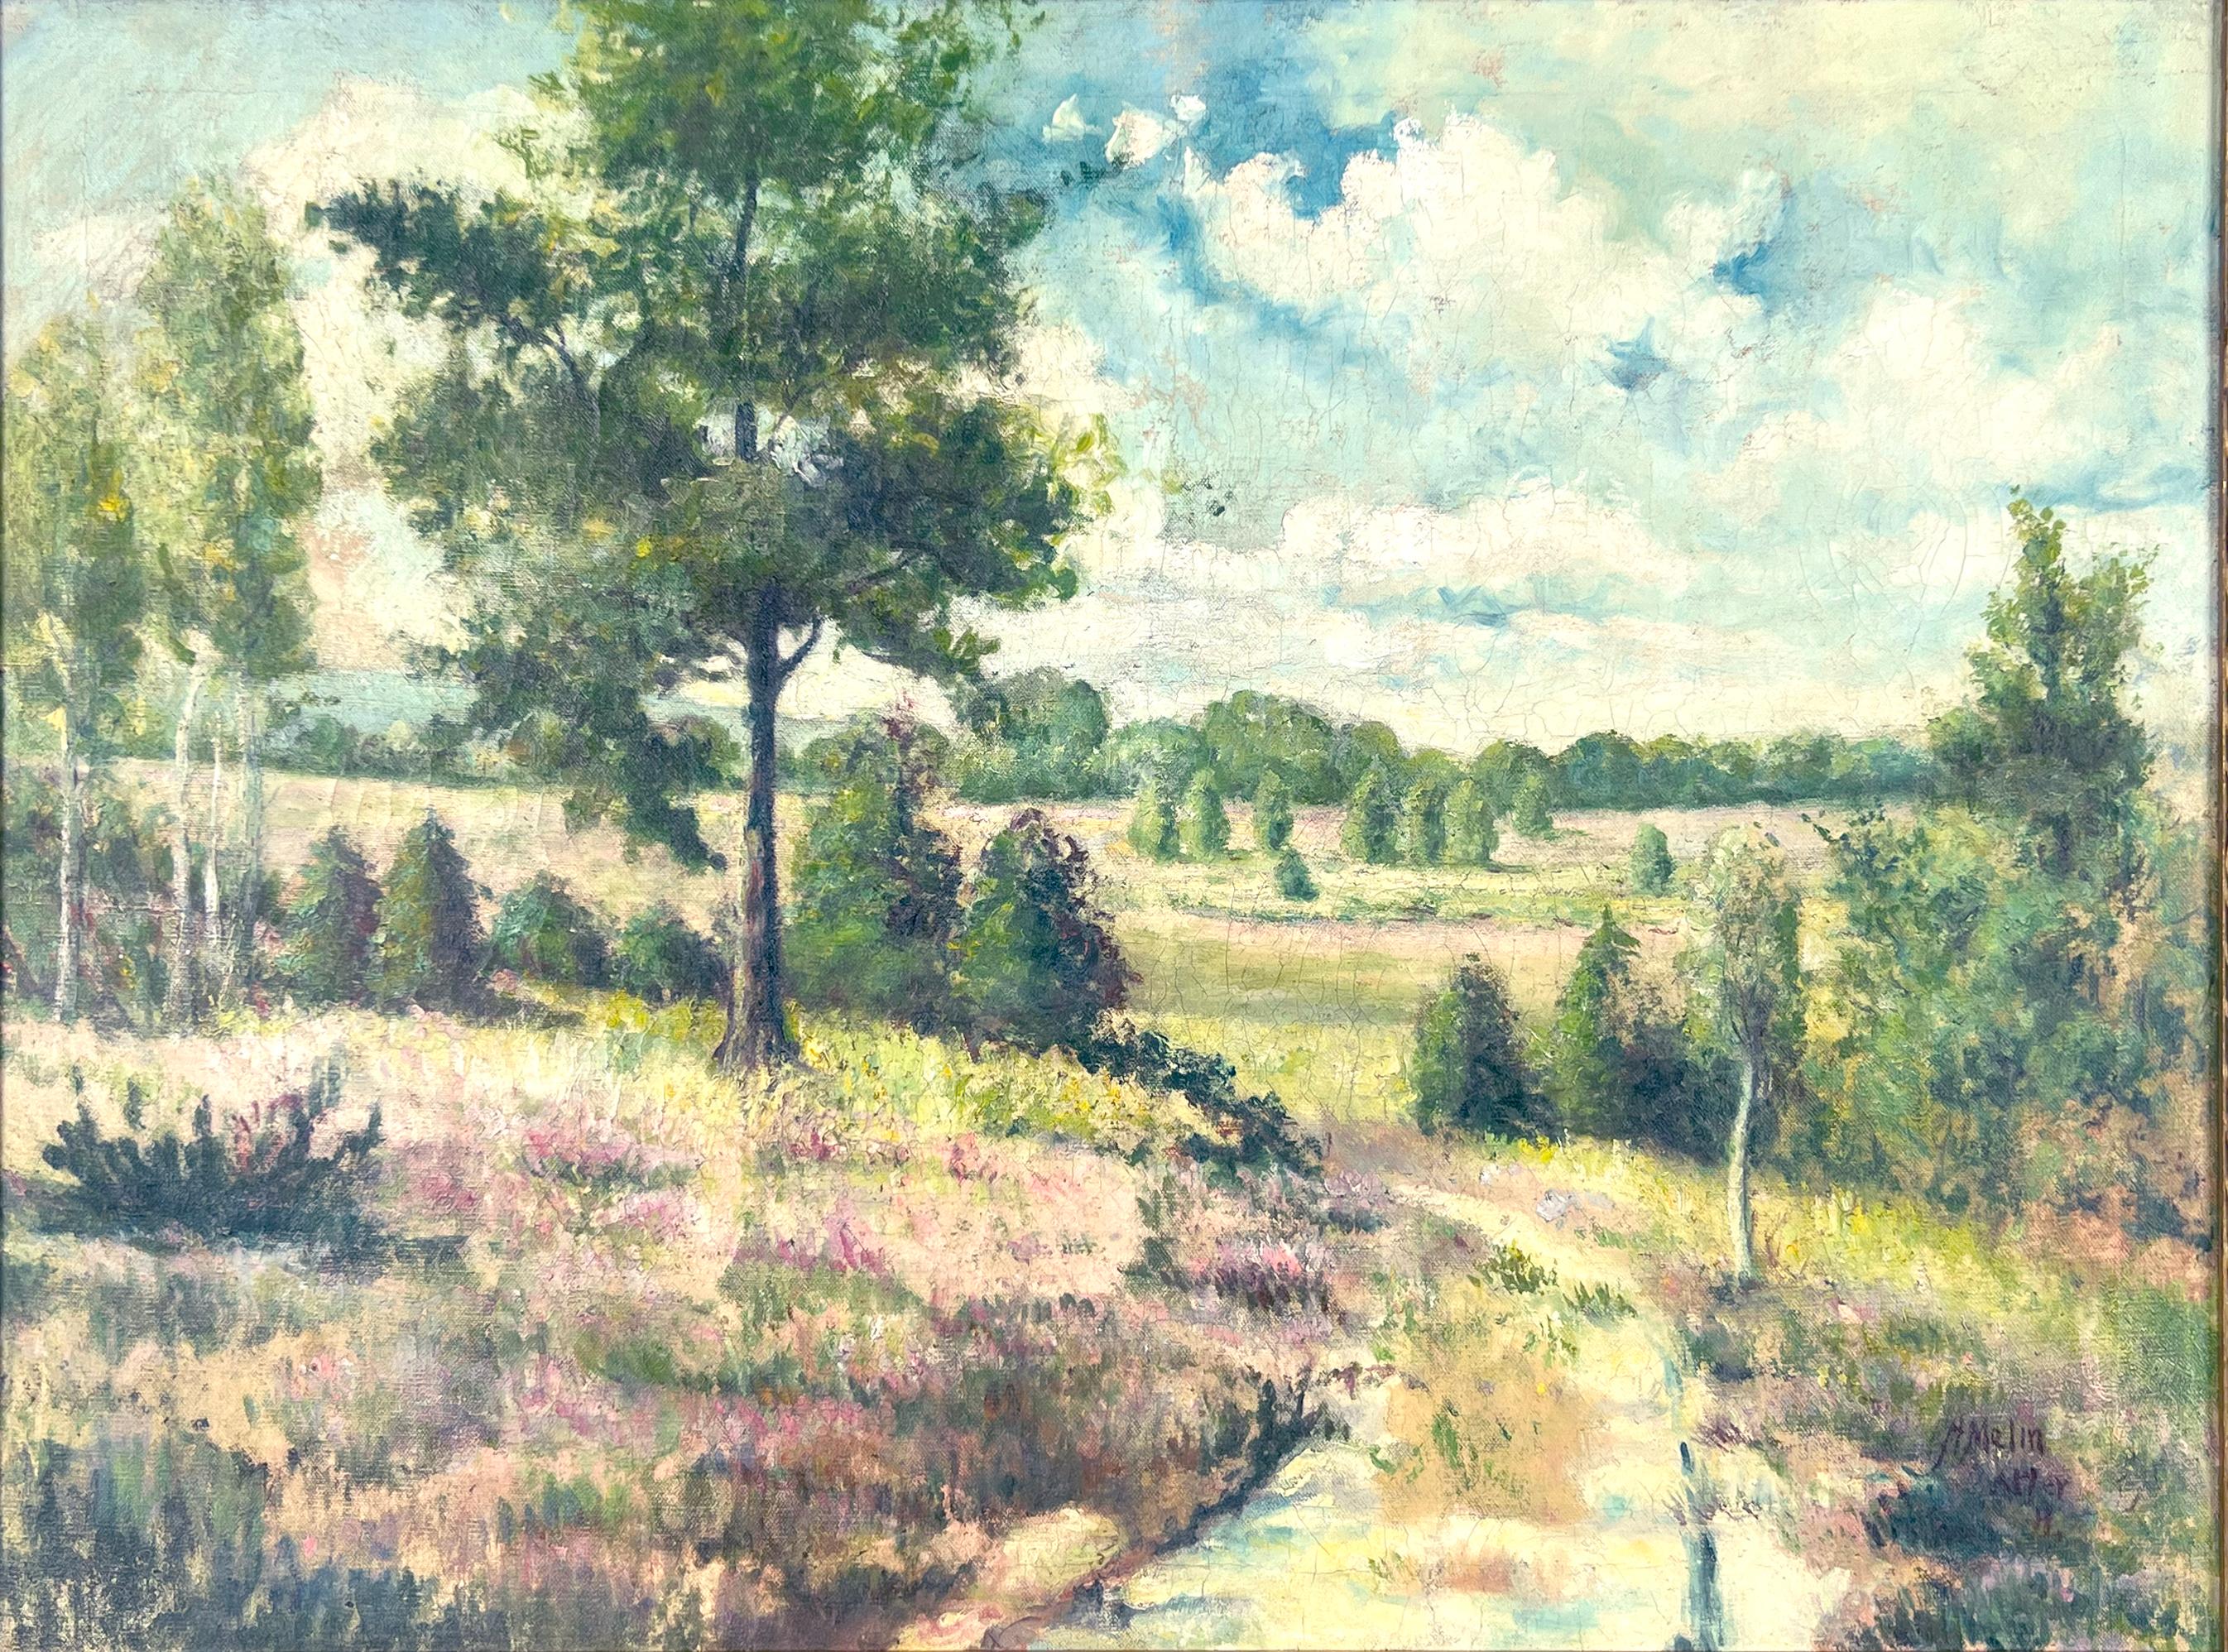 Arley - Staffordshire Heights England Landscape and Meadows by Melin - Painting by A. Melin